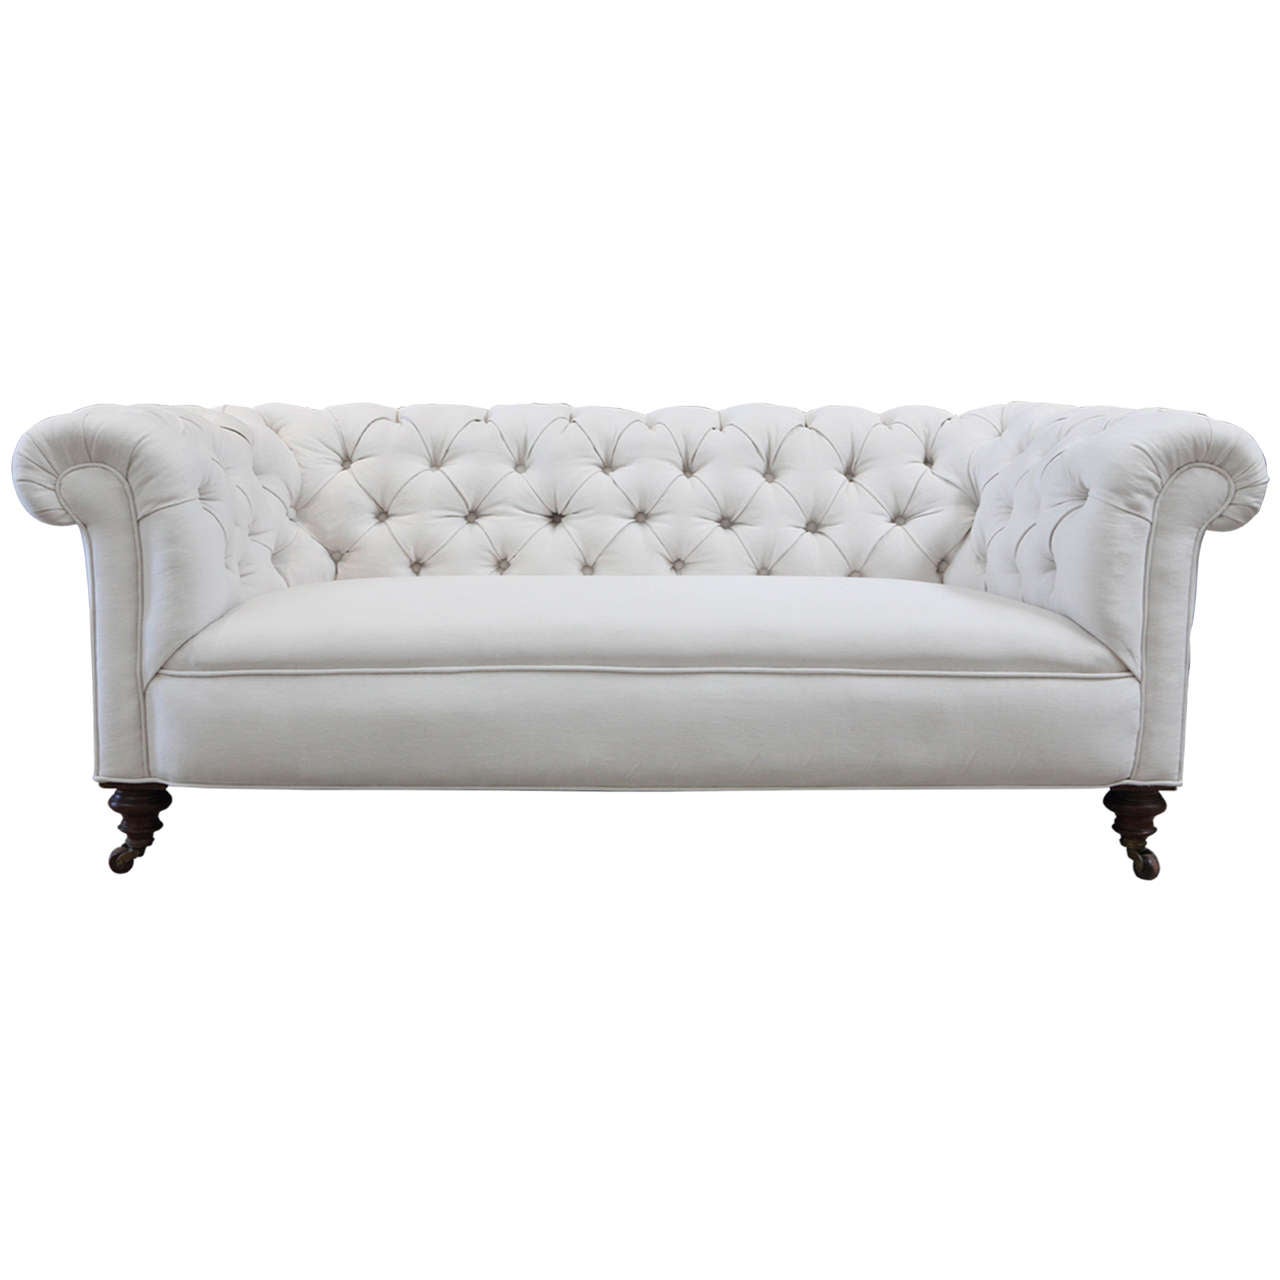 English Tufted Off-White Linen Loveseat , 19th Century